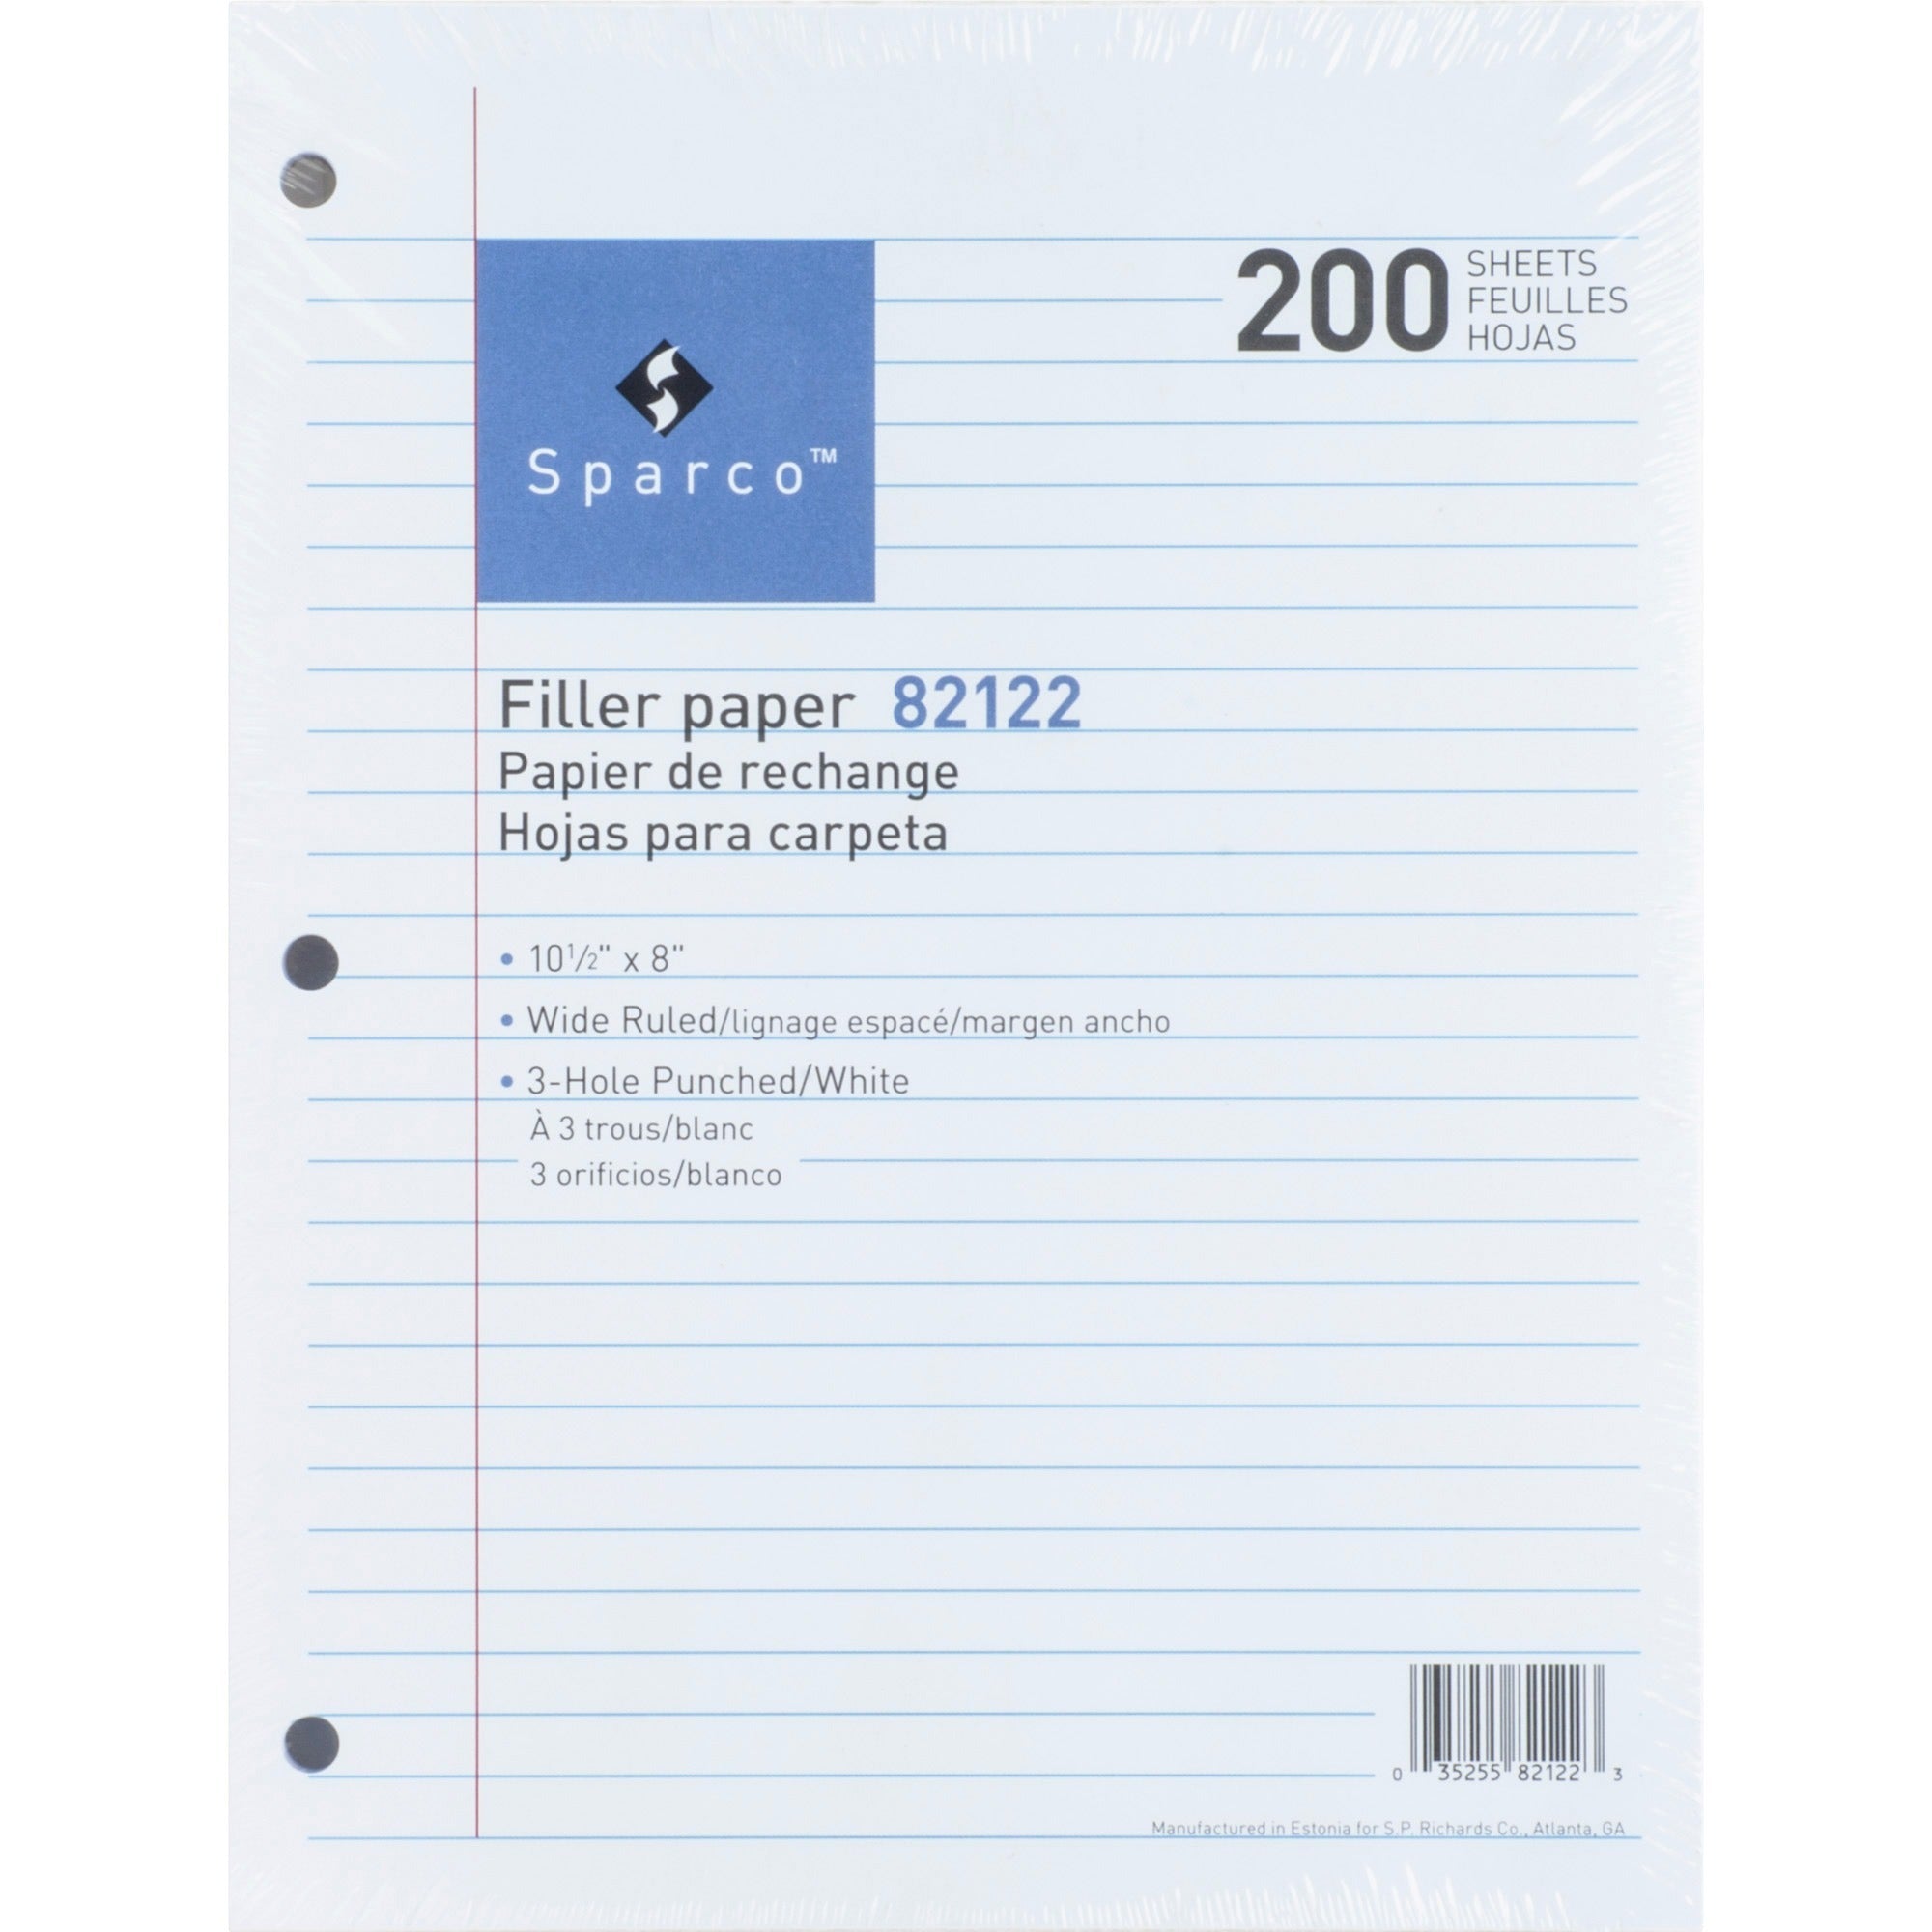 Sparco 3-hole Punched Filler Paper - 200 Sheets - Wide Ruled - Ruled Red Margin - 16 lb Basis Weight - 8" x 10 1/2" - White Paper - Bleed-free - 200 / Pack - 